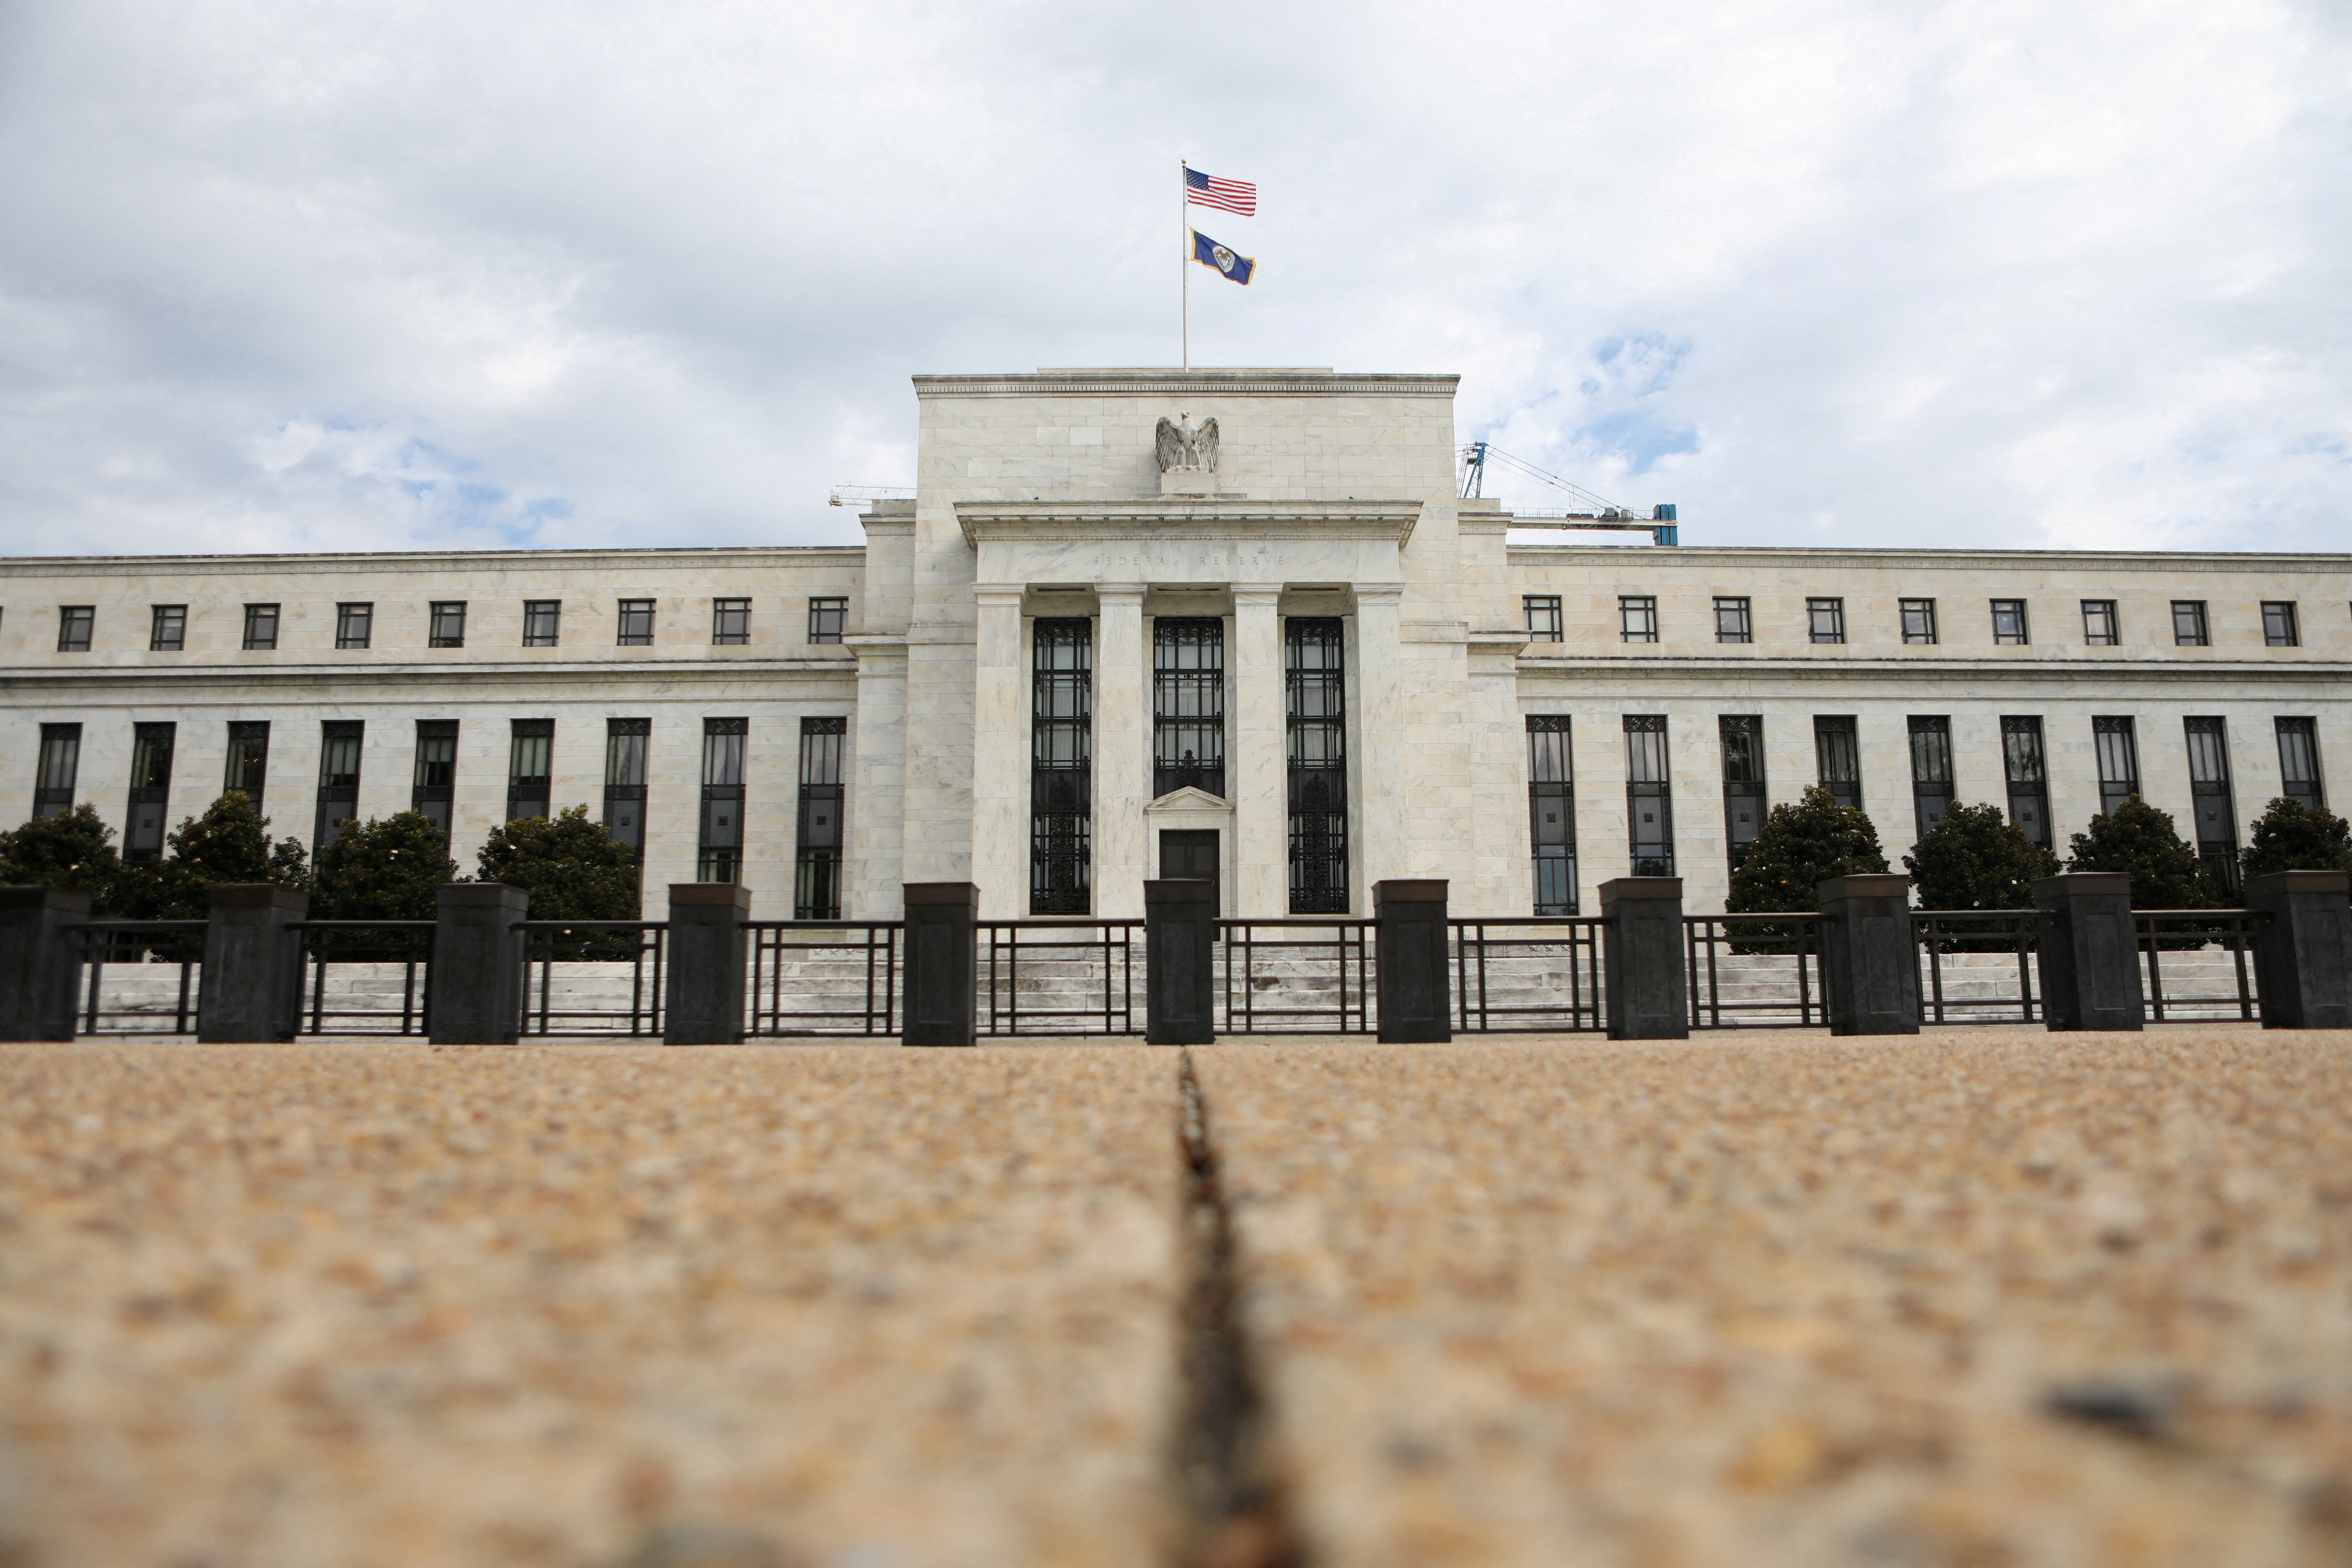 The Federal Reserve building is pictured in Washington, DC